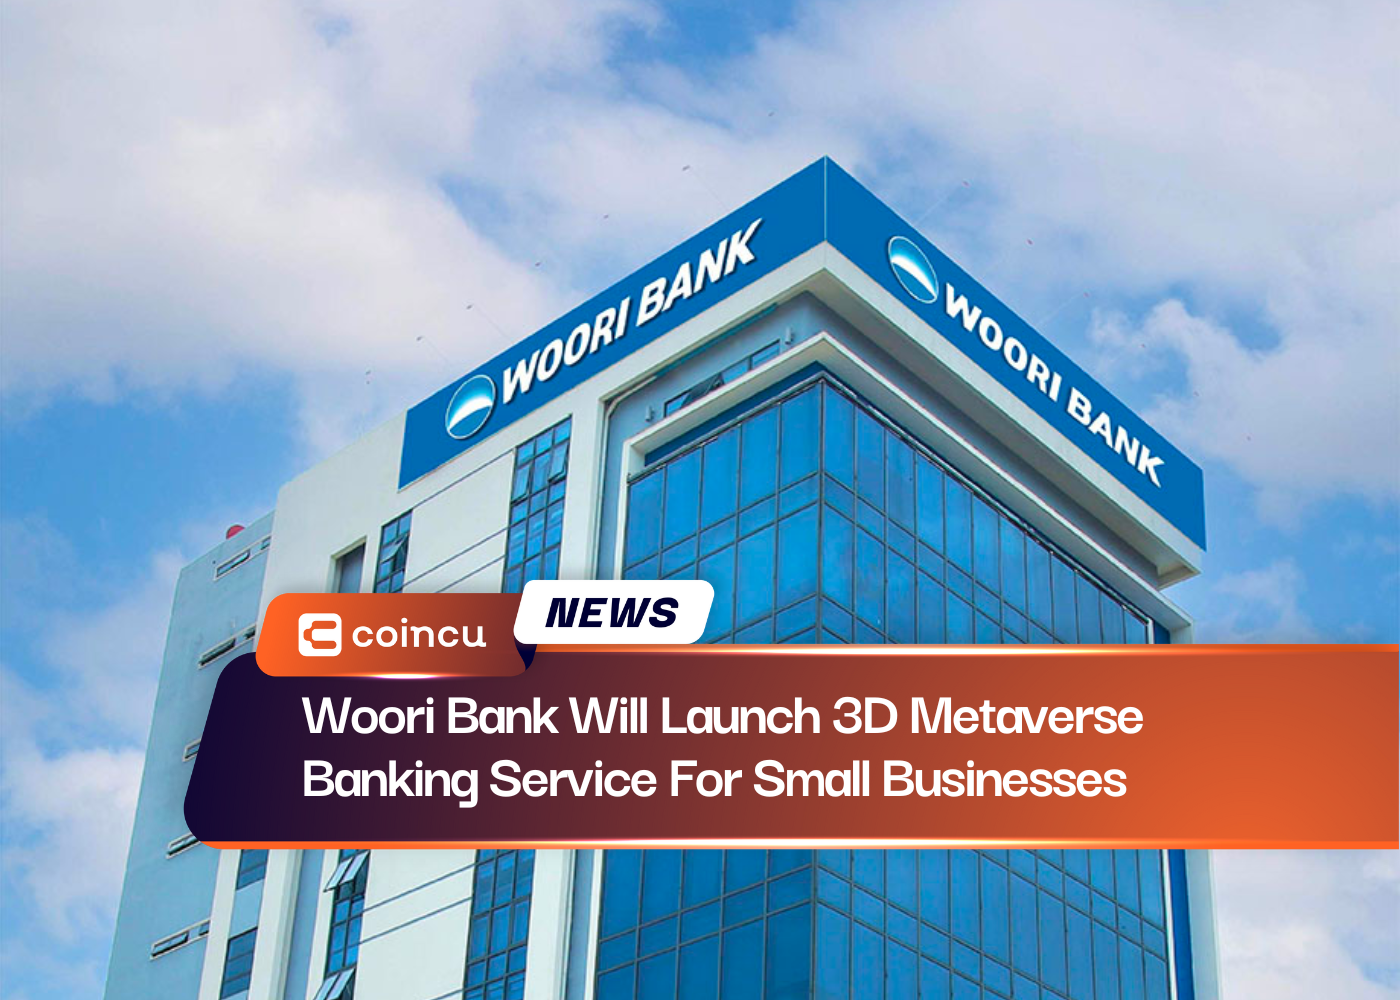 Woori Bank Will Launch 3D Metaverse Banking Service For Small Businesses